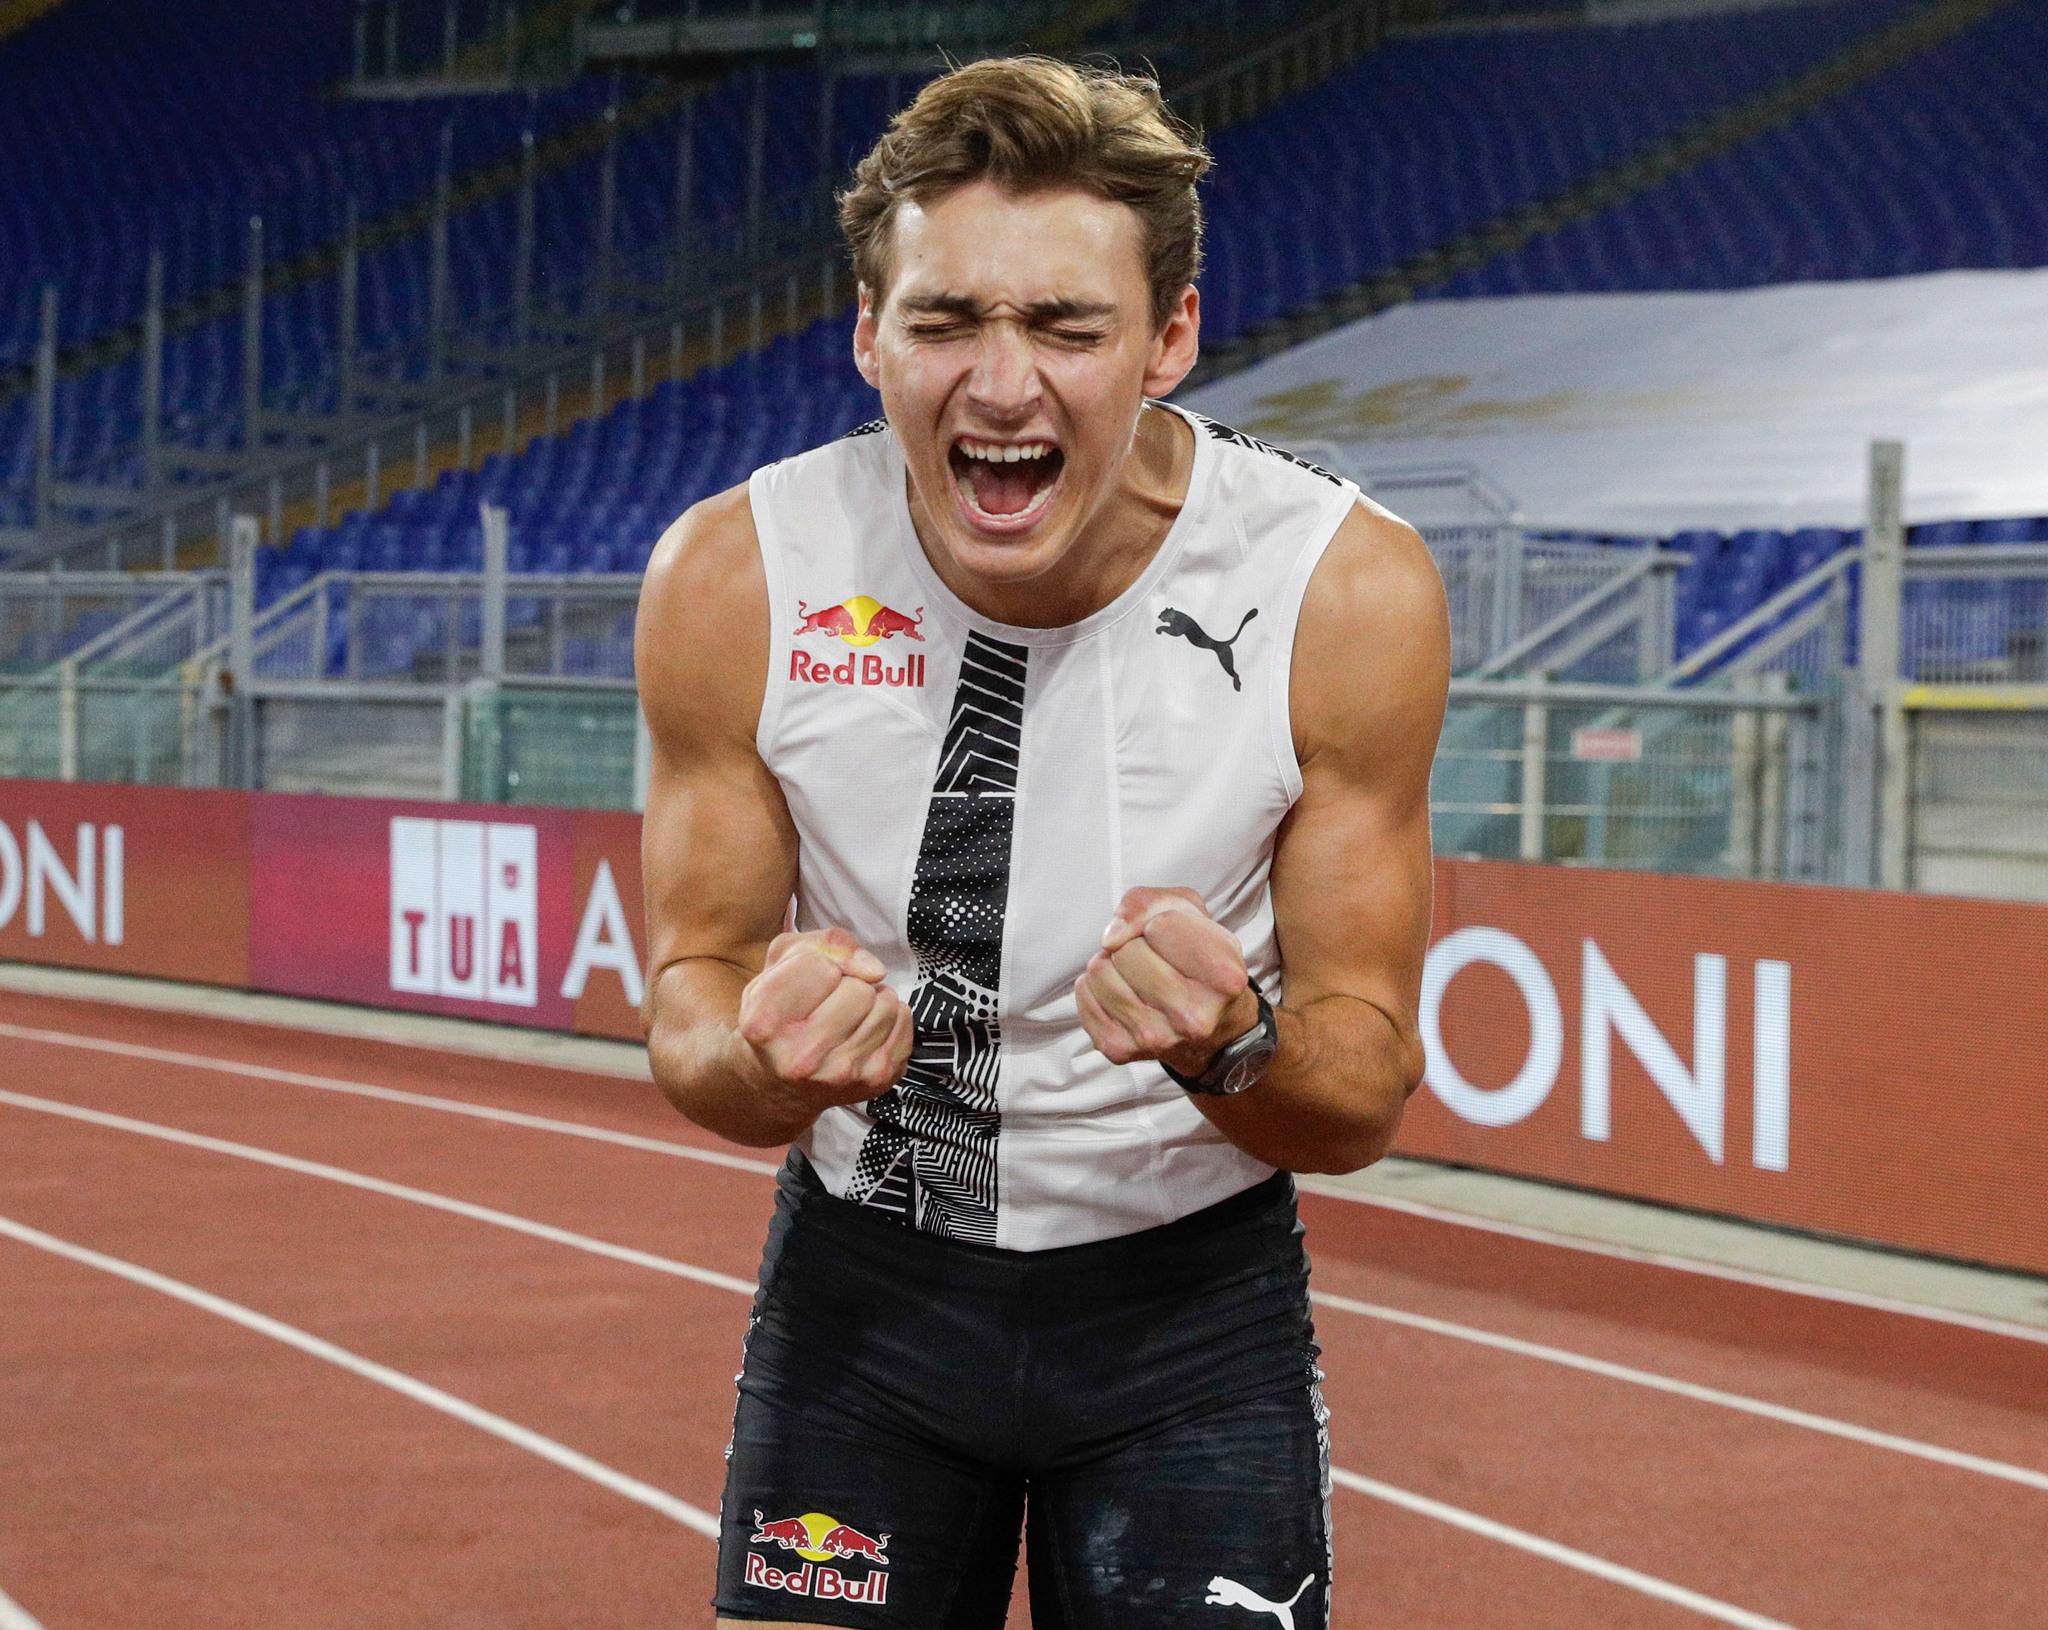 Armand Duplantis in a sports arena making a winning gesture by clenching his fists.